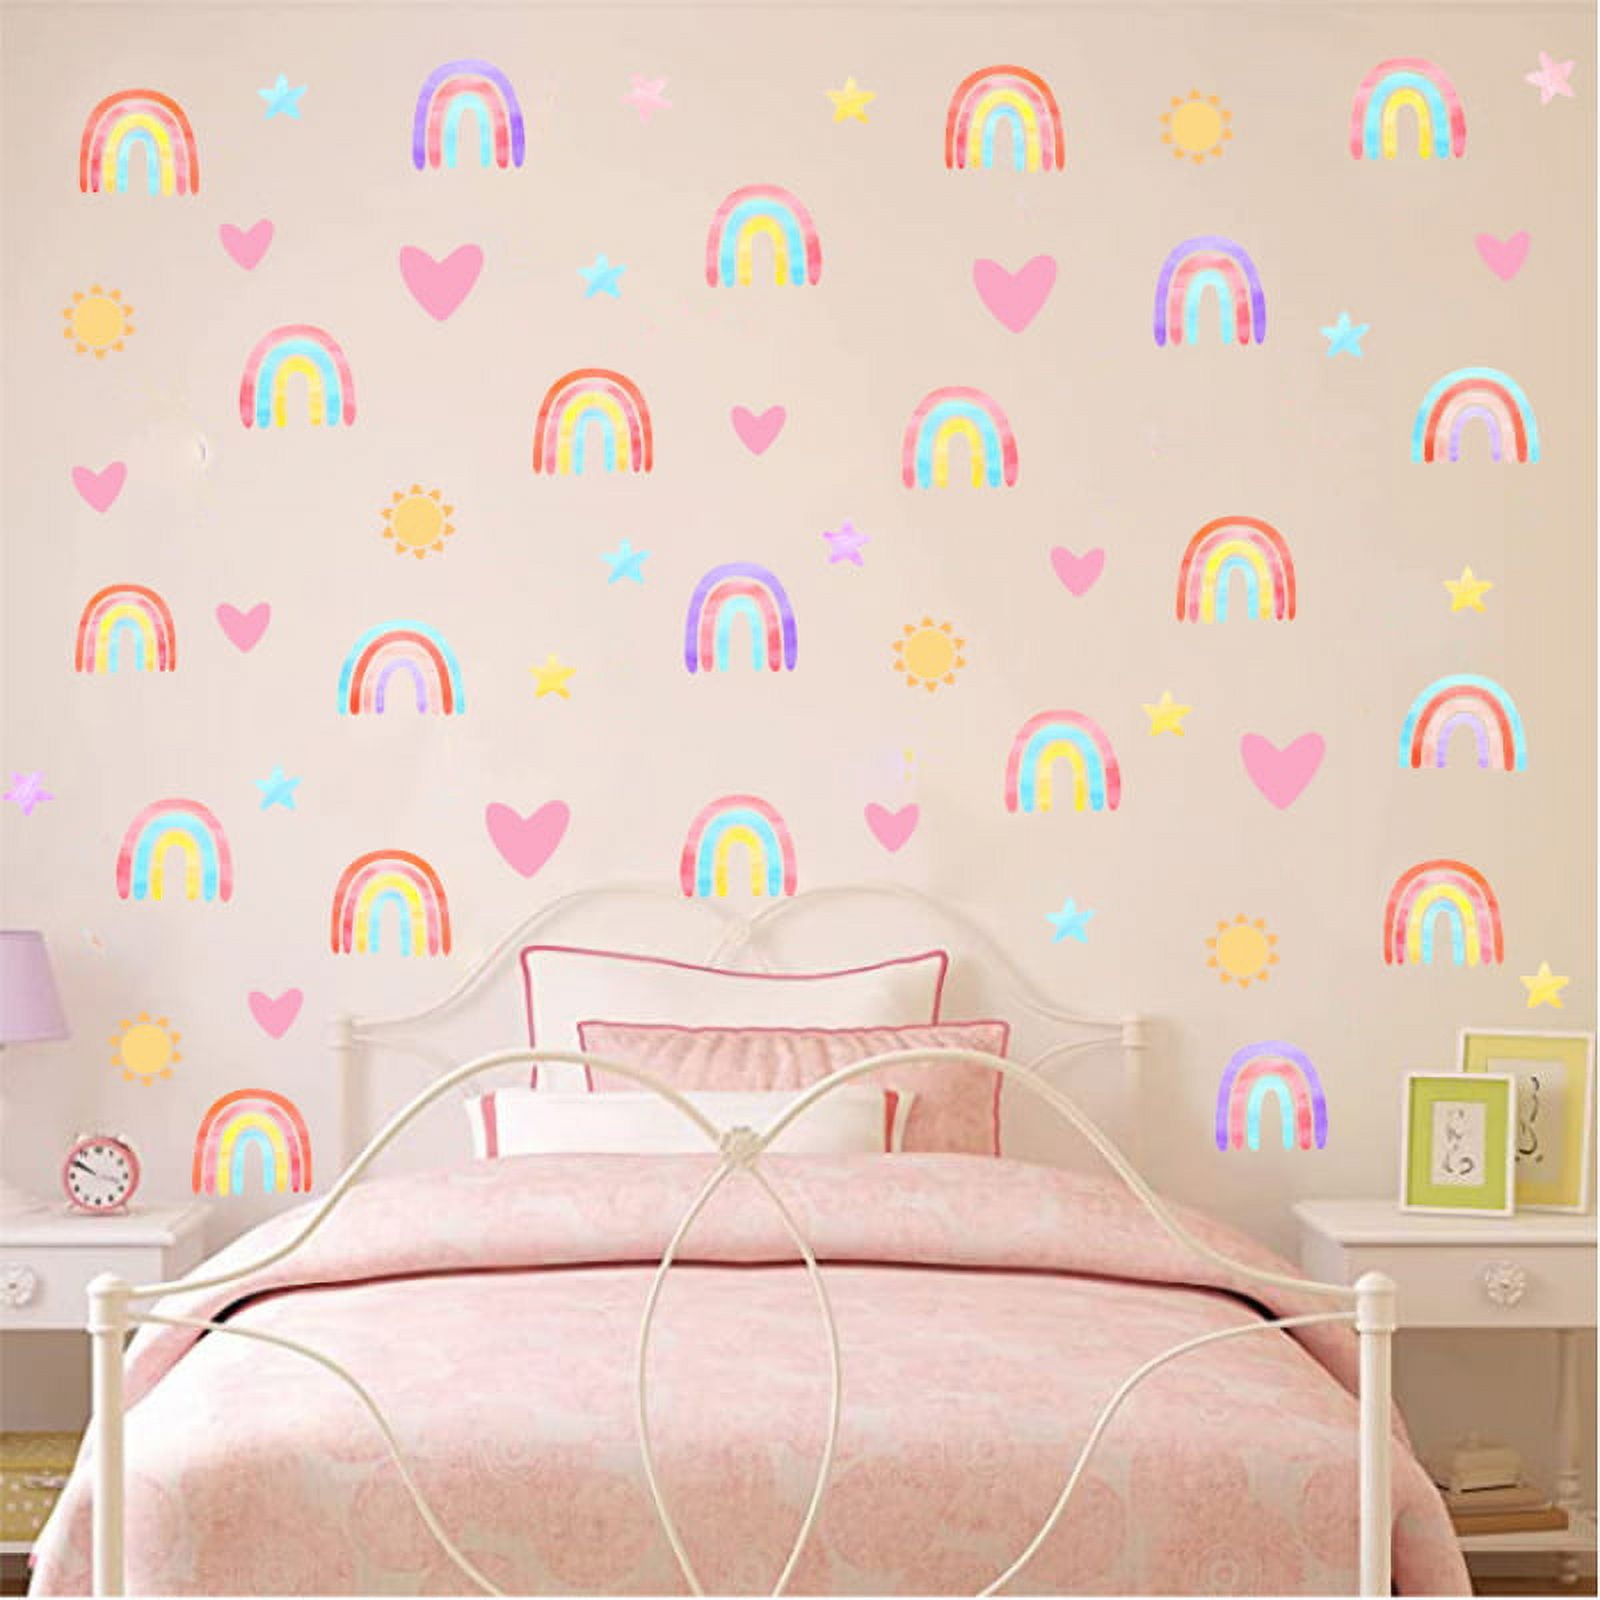 Sticker mural - Rainbow with clouds pink